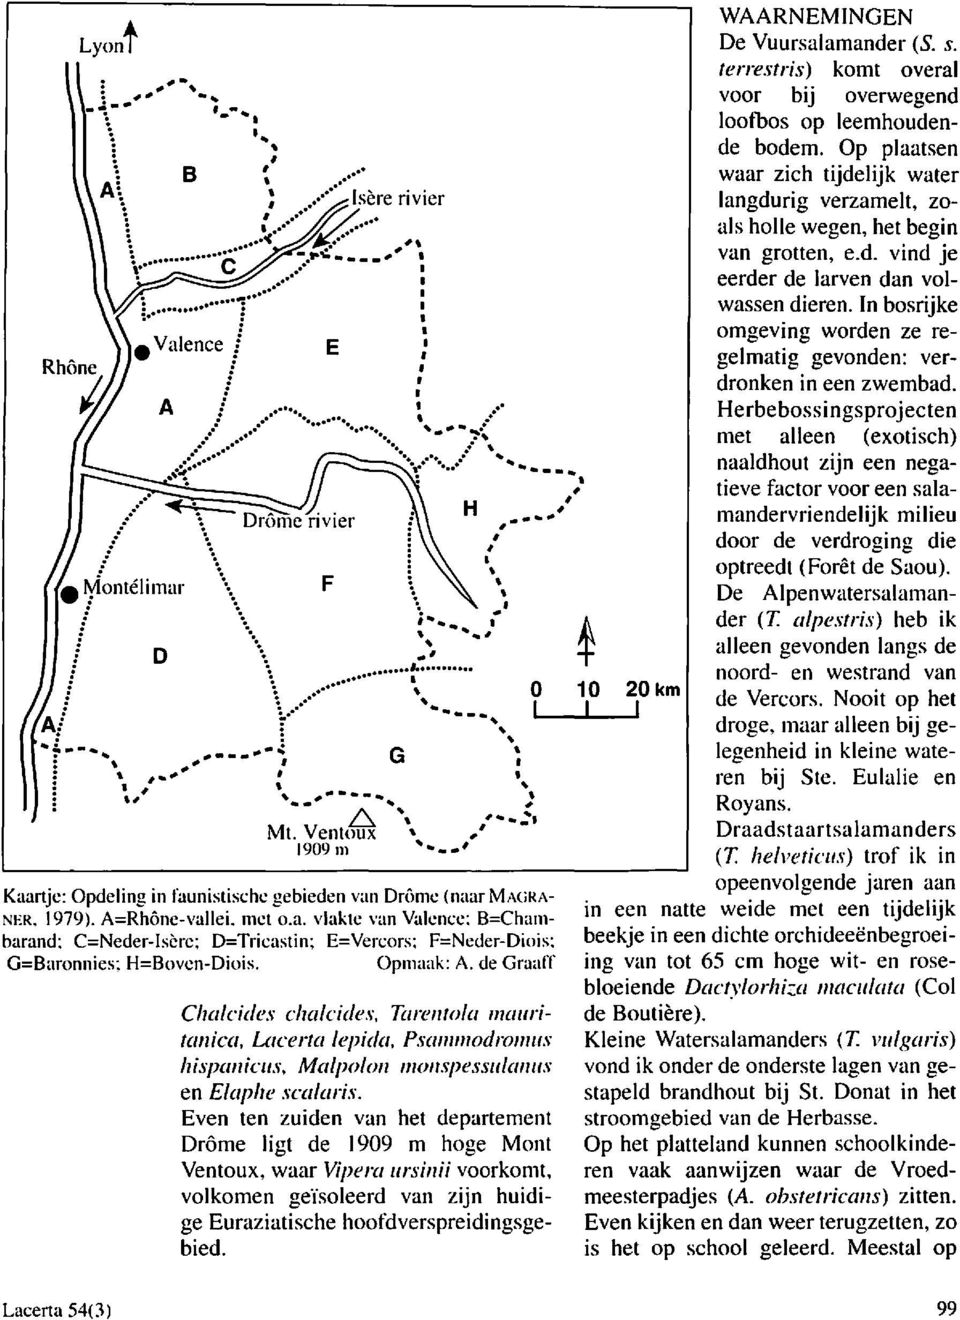 1979). A=Rhonc-vallei. met o.a. vlaktc van Valence: B=Chambarand: C=Neder-Iscre; D=Tricastin; E=Vercors: F=Neder-Diois: G=Baronnies; H=Boven-Diois. Opmaak: A.